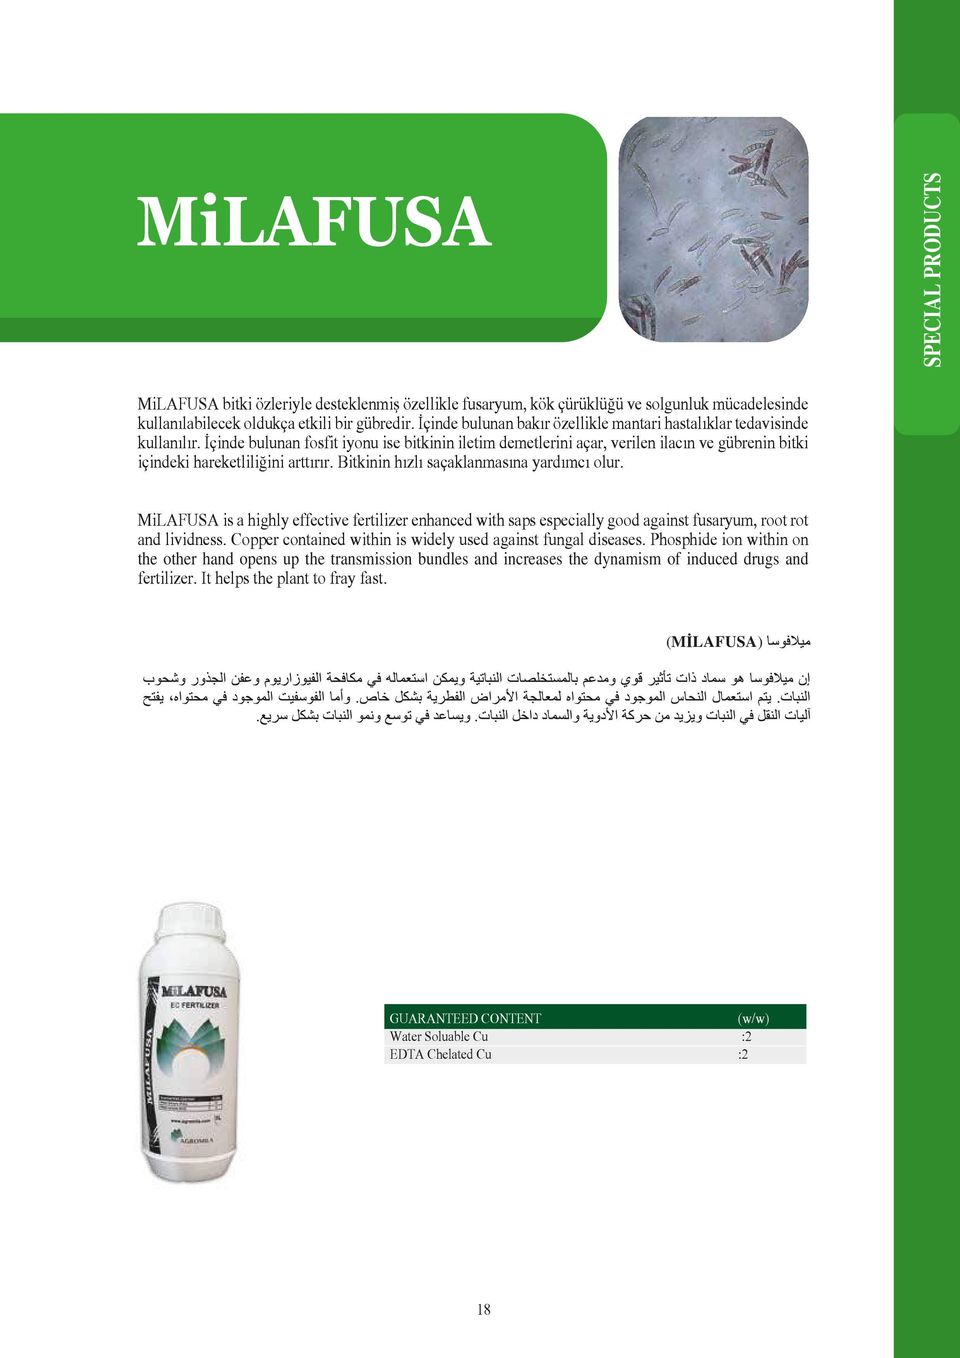 hızlı saçaklanmasına yardımcı olur MiLAFUSA is a highly effective fertilizer enhanced with saps especially good against fusaryum, root rot and lividness Copper contained within is widely used against